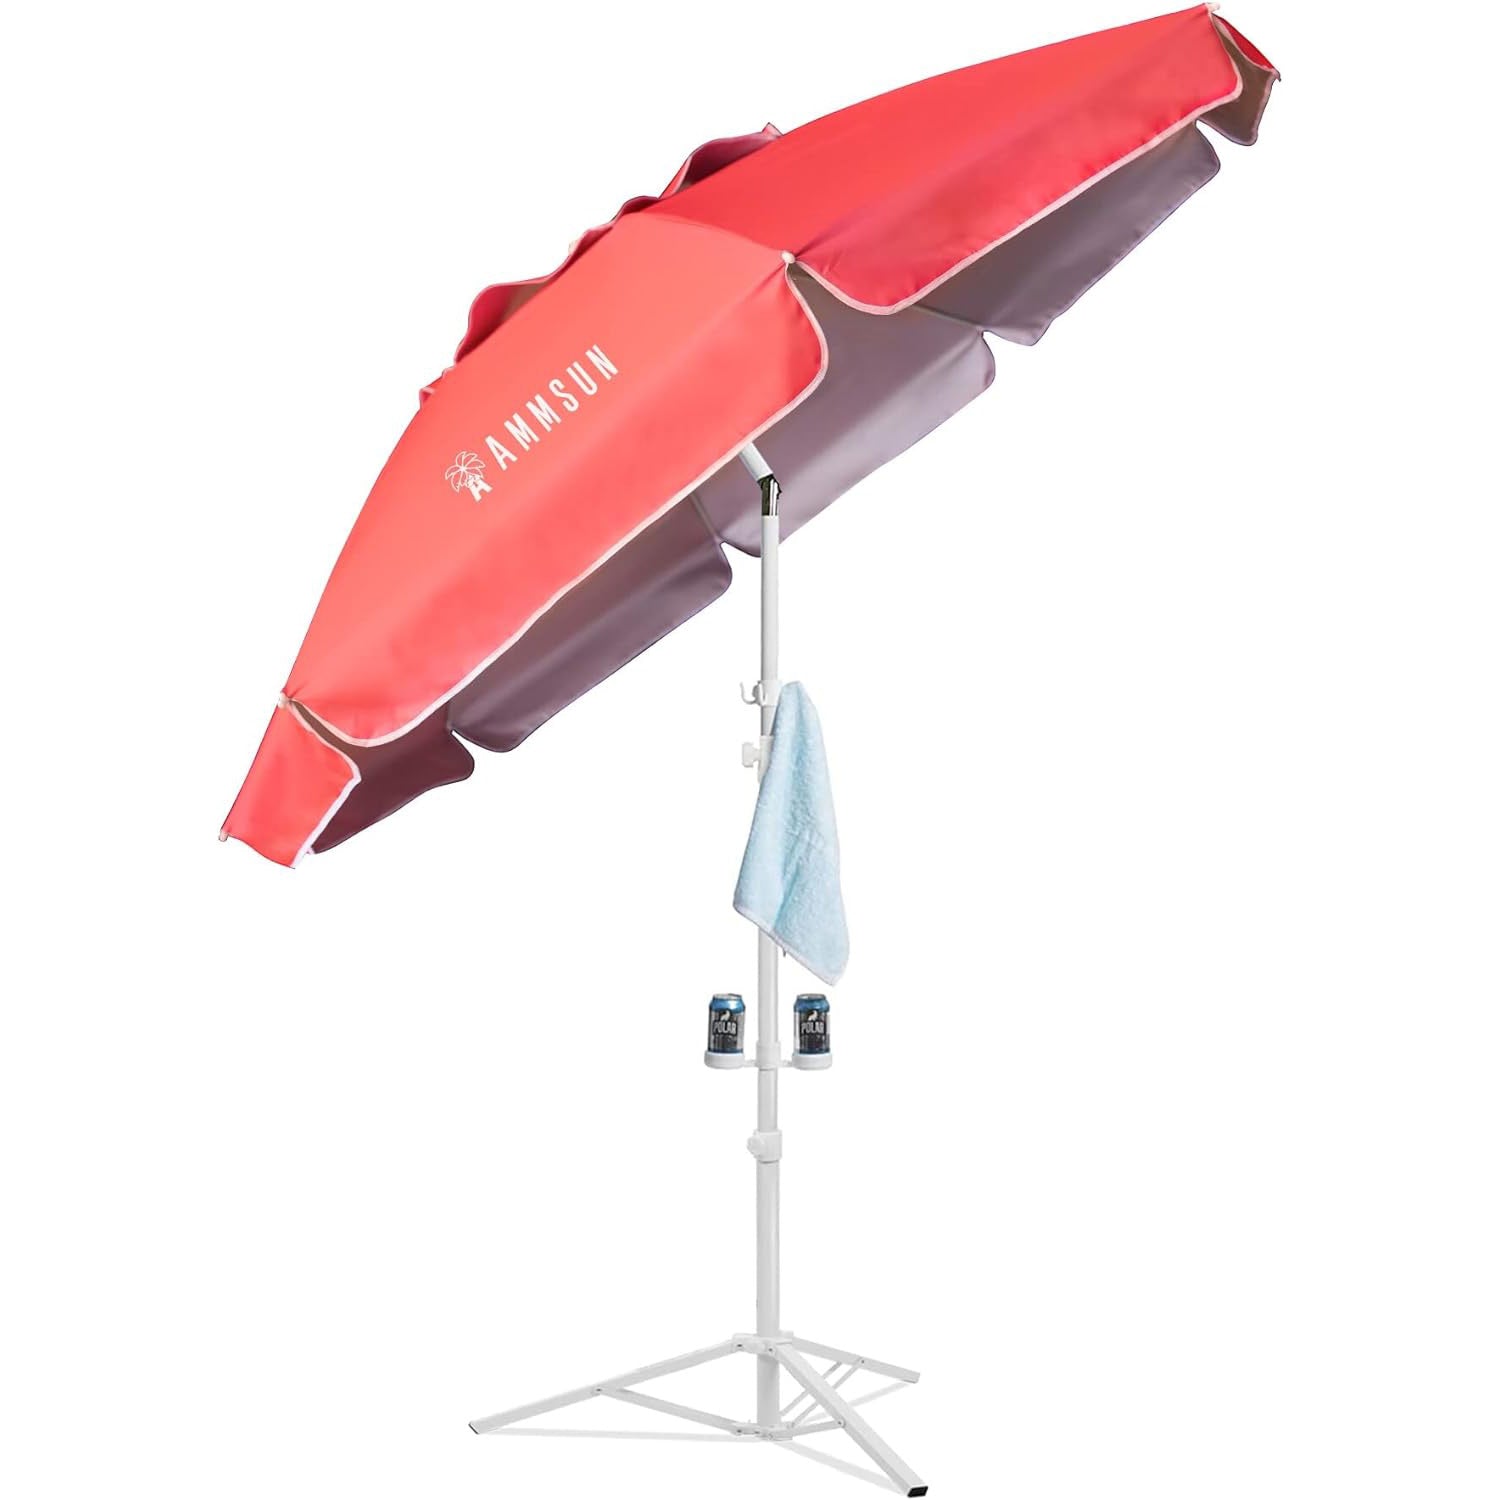 AMMSUN 6.5ft Lightweight Portable Sports Umbrella with Stand Pink